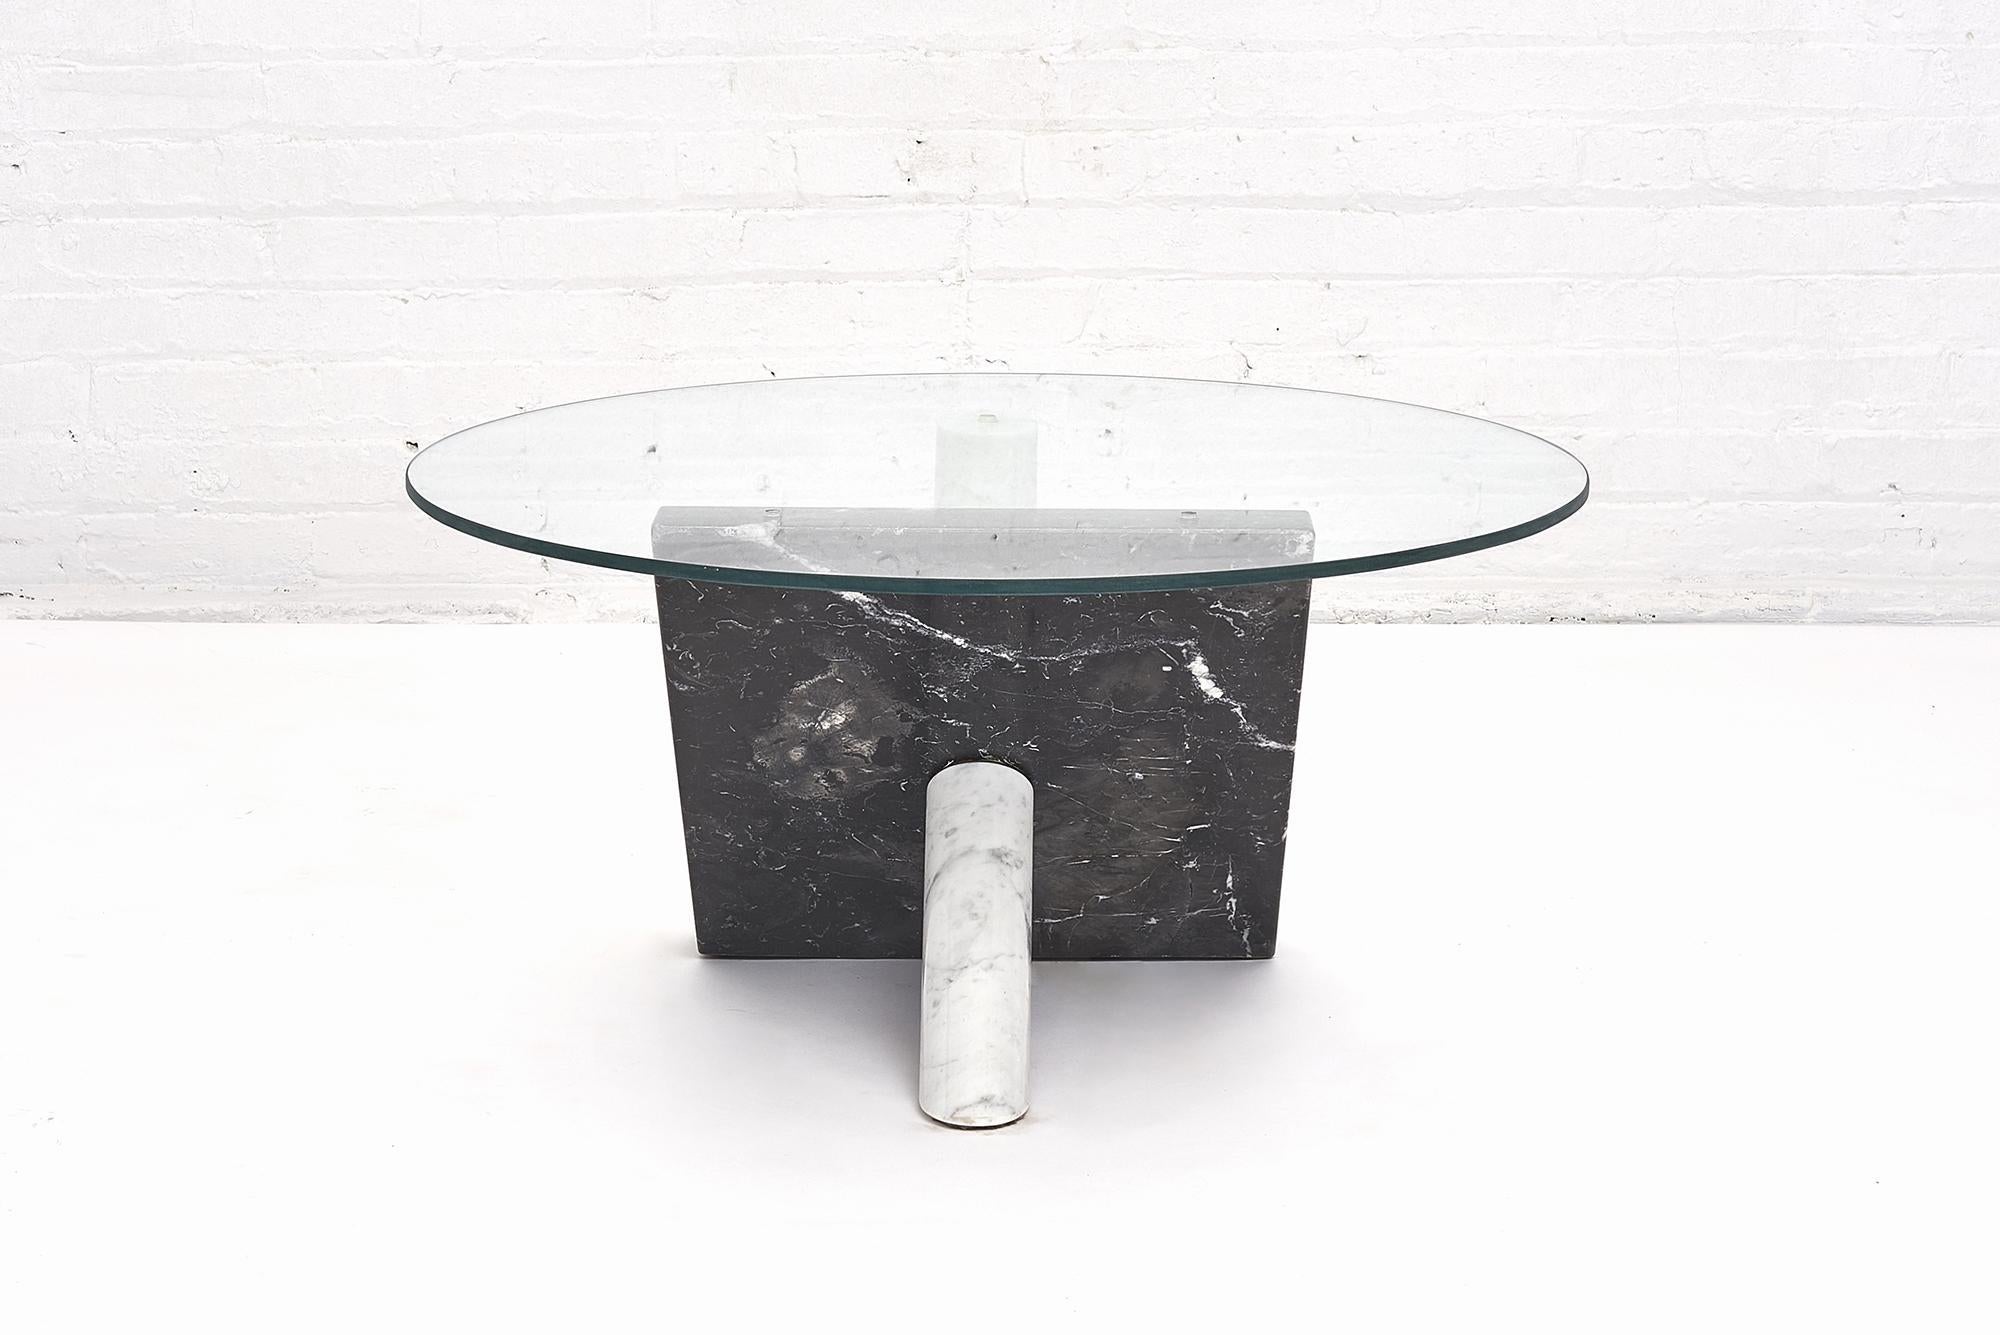 Modern Italian black and white marble side table, circa 1970s.
Nero Marquina slab is intersected by a Carrara marble post.